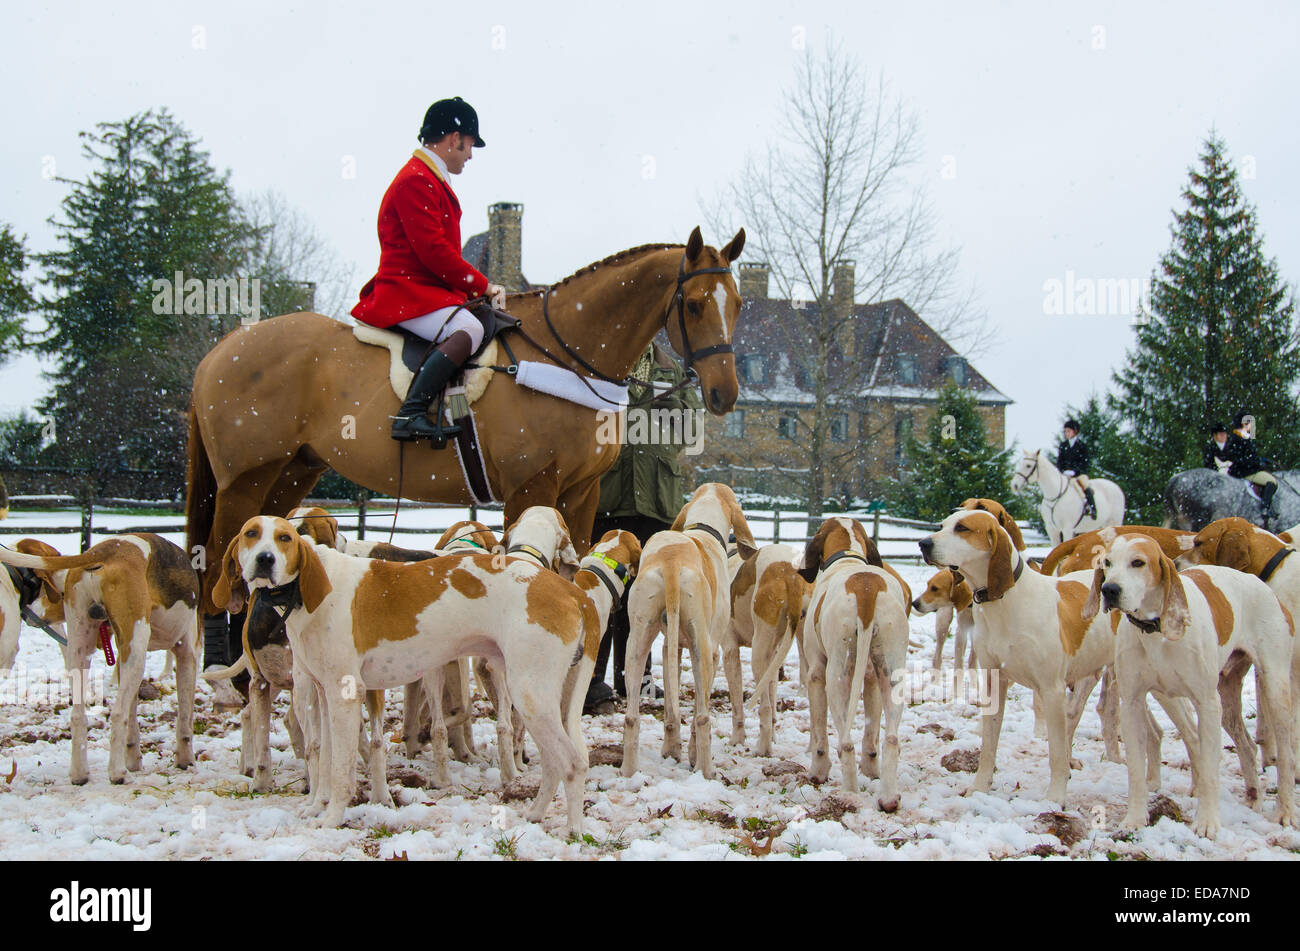 As the bugle sounds, The Essex Hunt Club sends horses and hounds racing into the meadowland for an annual Thanksgiving fox hunt. Stock Photo